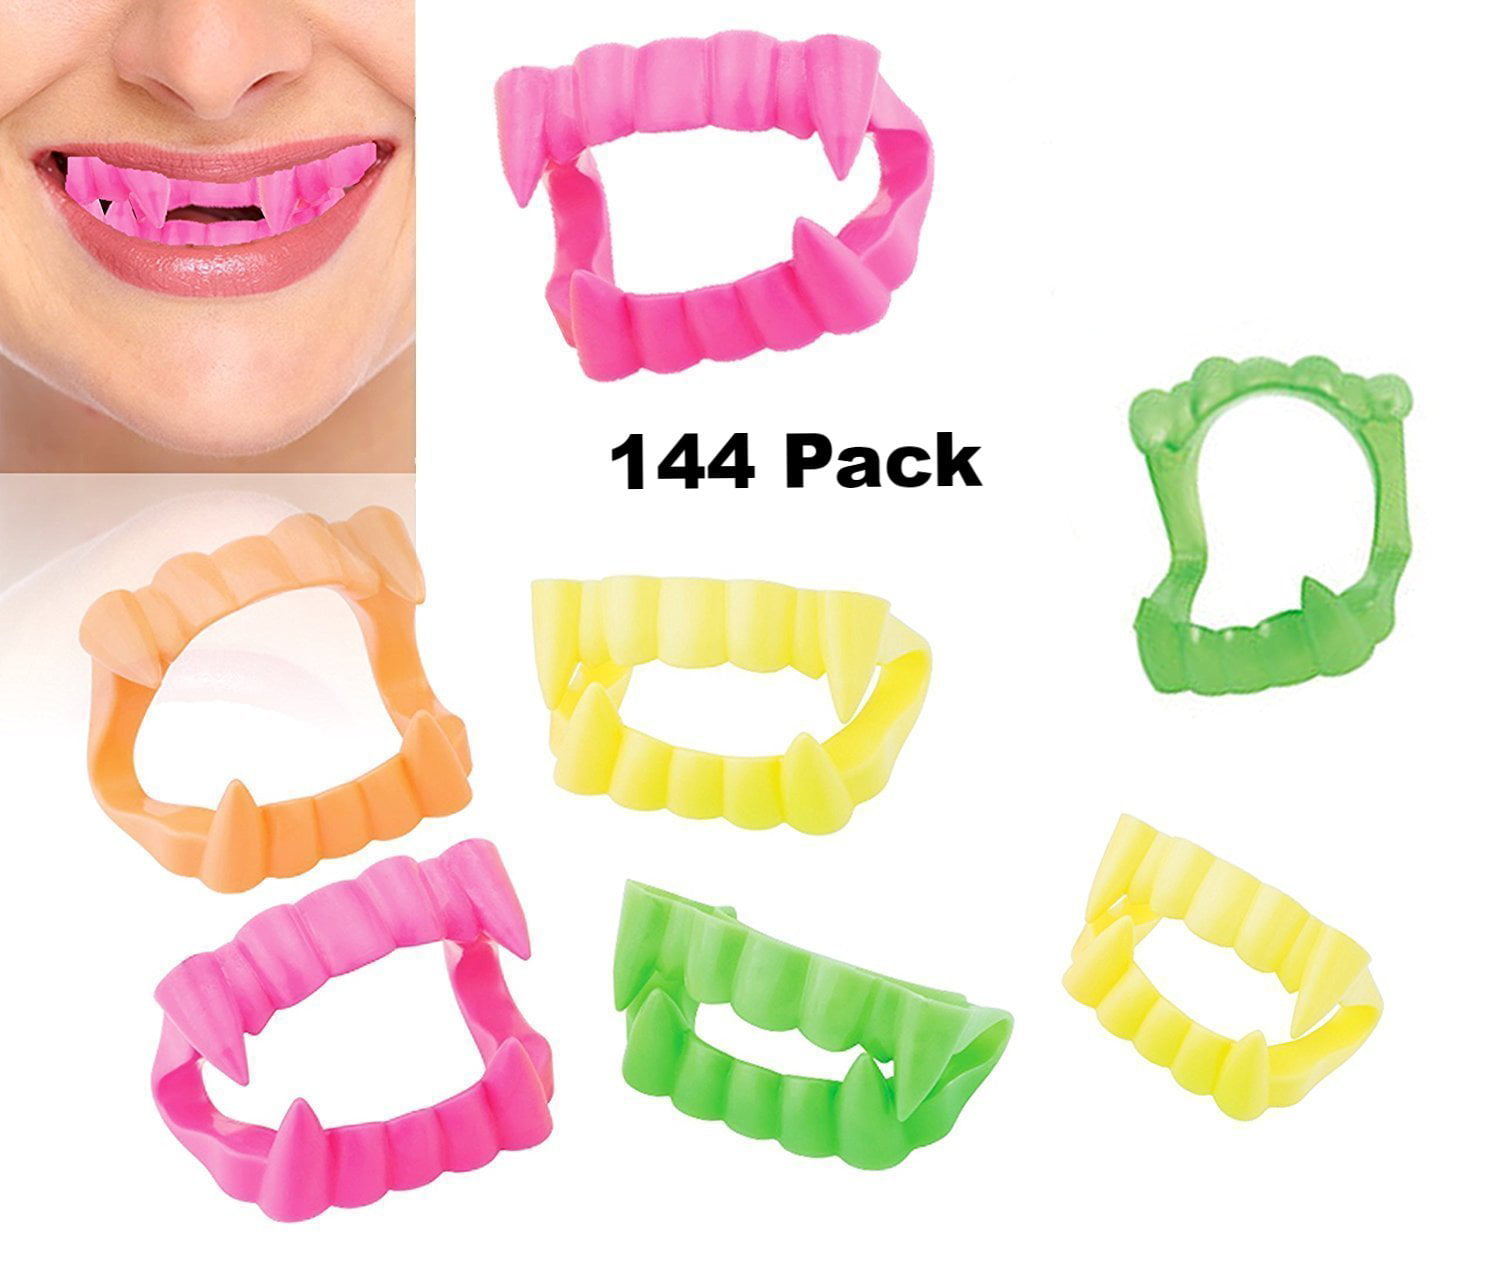 Neon Vampire Fangs for Kids and Adults, Bulk Pack of 144, Vampirina Party Supplies, Dracula Costume Accessories, Best for Halloween Party Favors